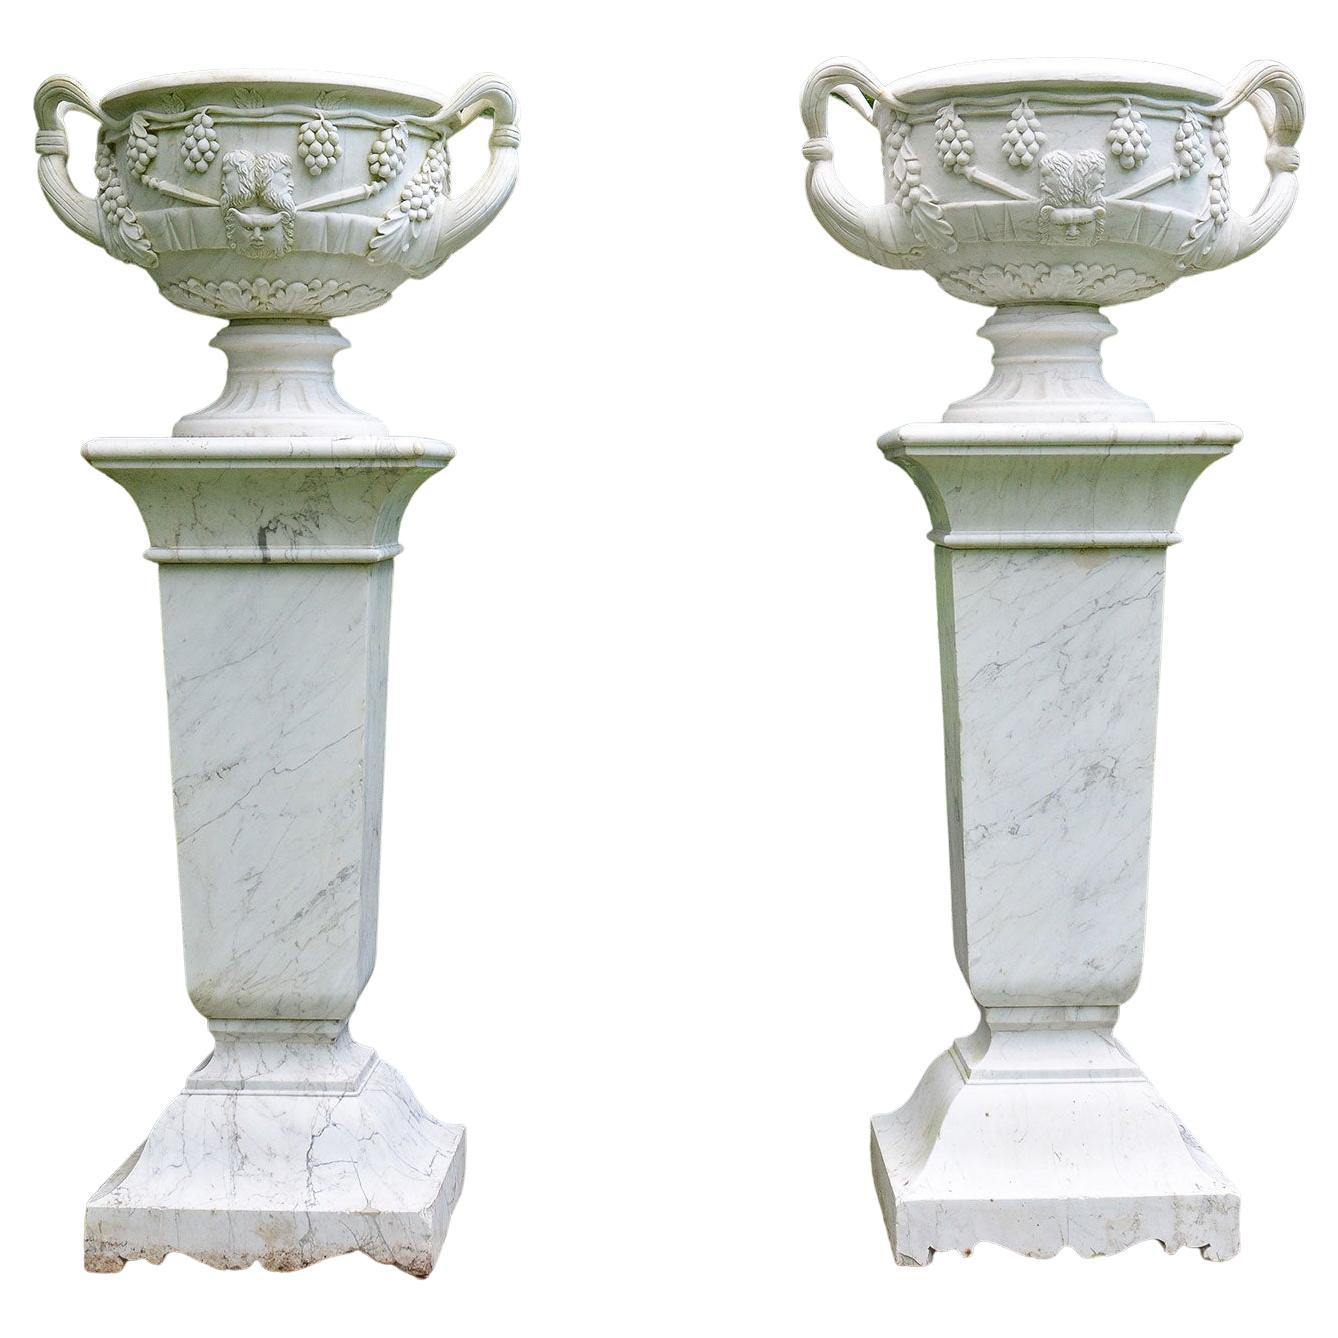 Pair of White Marble Urns on Tall White Marble Pedestals For Sale